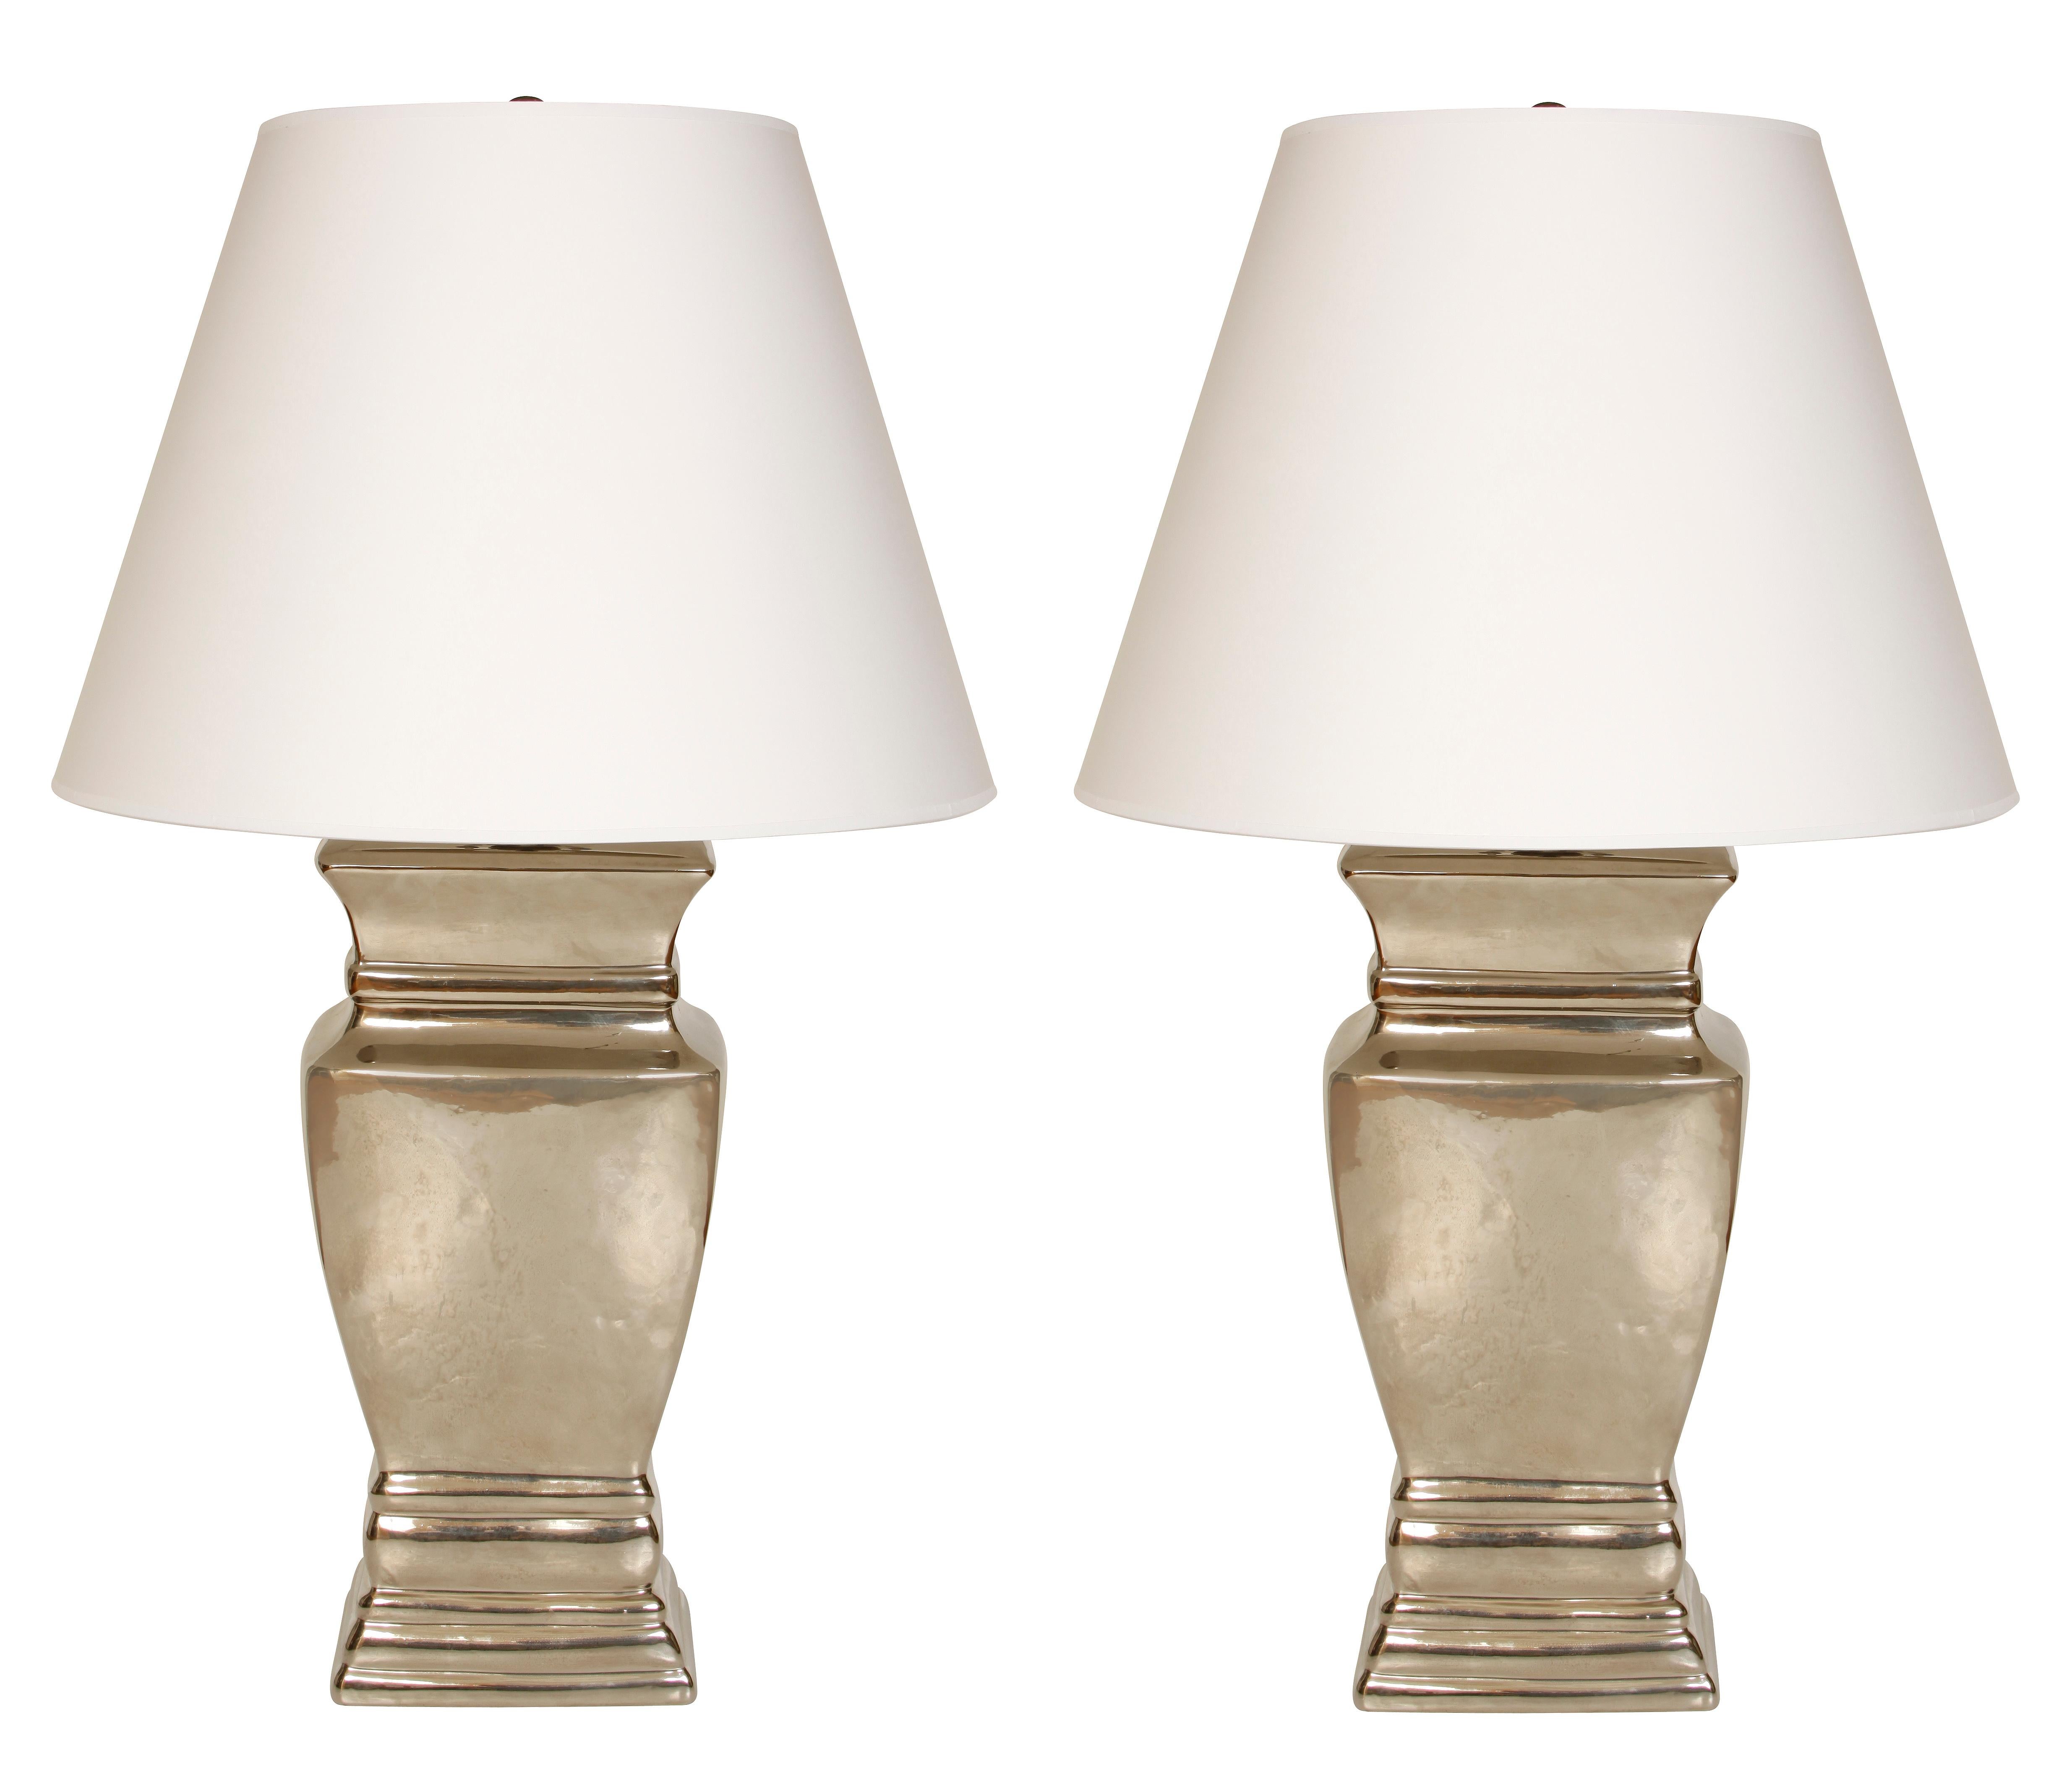 Pair of Modern Silvered Ceramic Lamps In Good Condition For Sale In Locust Valley, NY